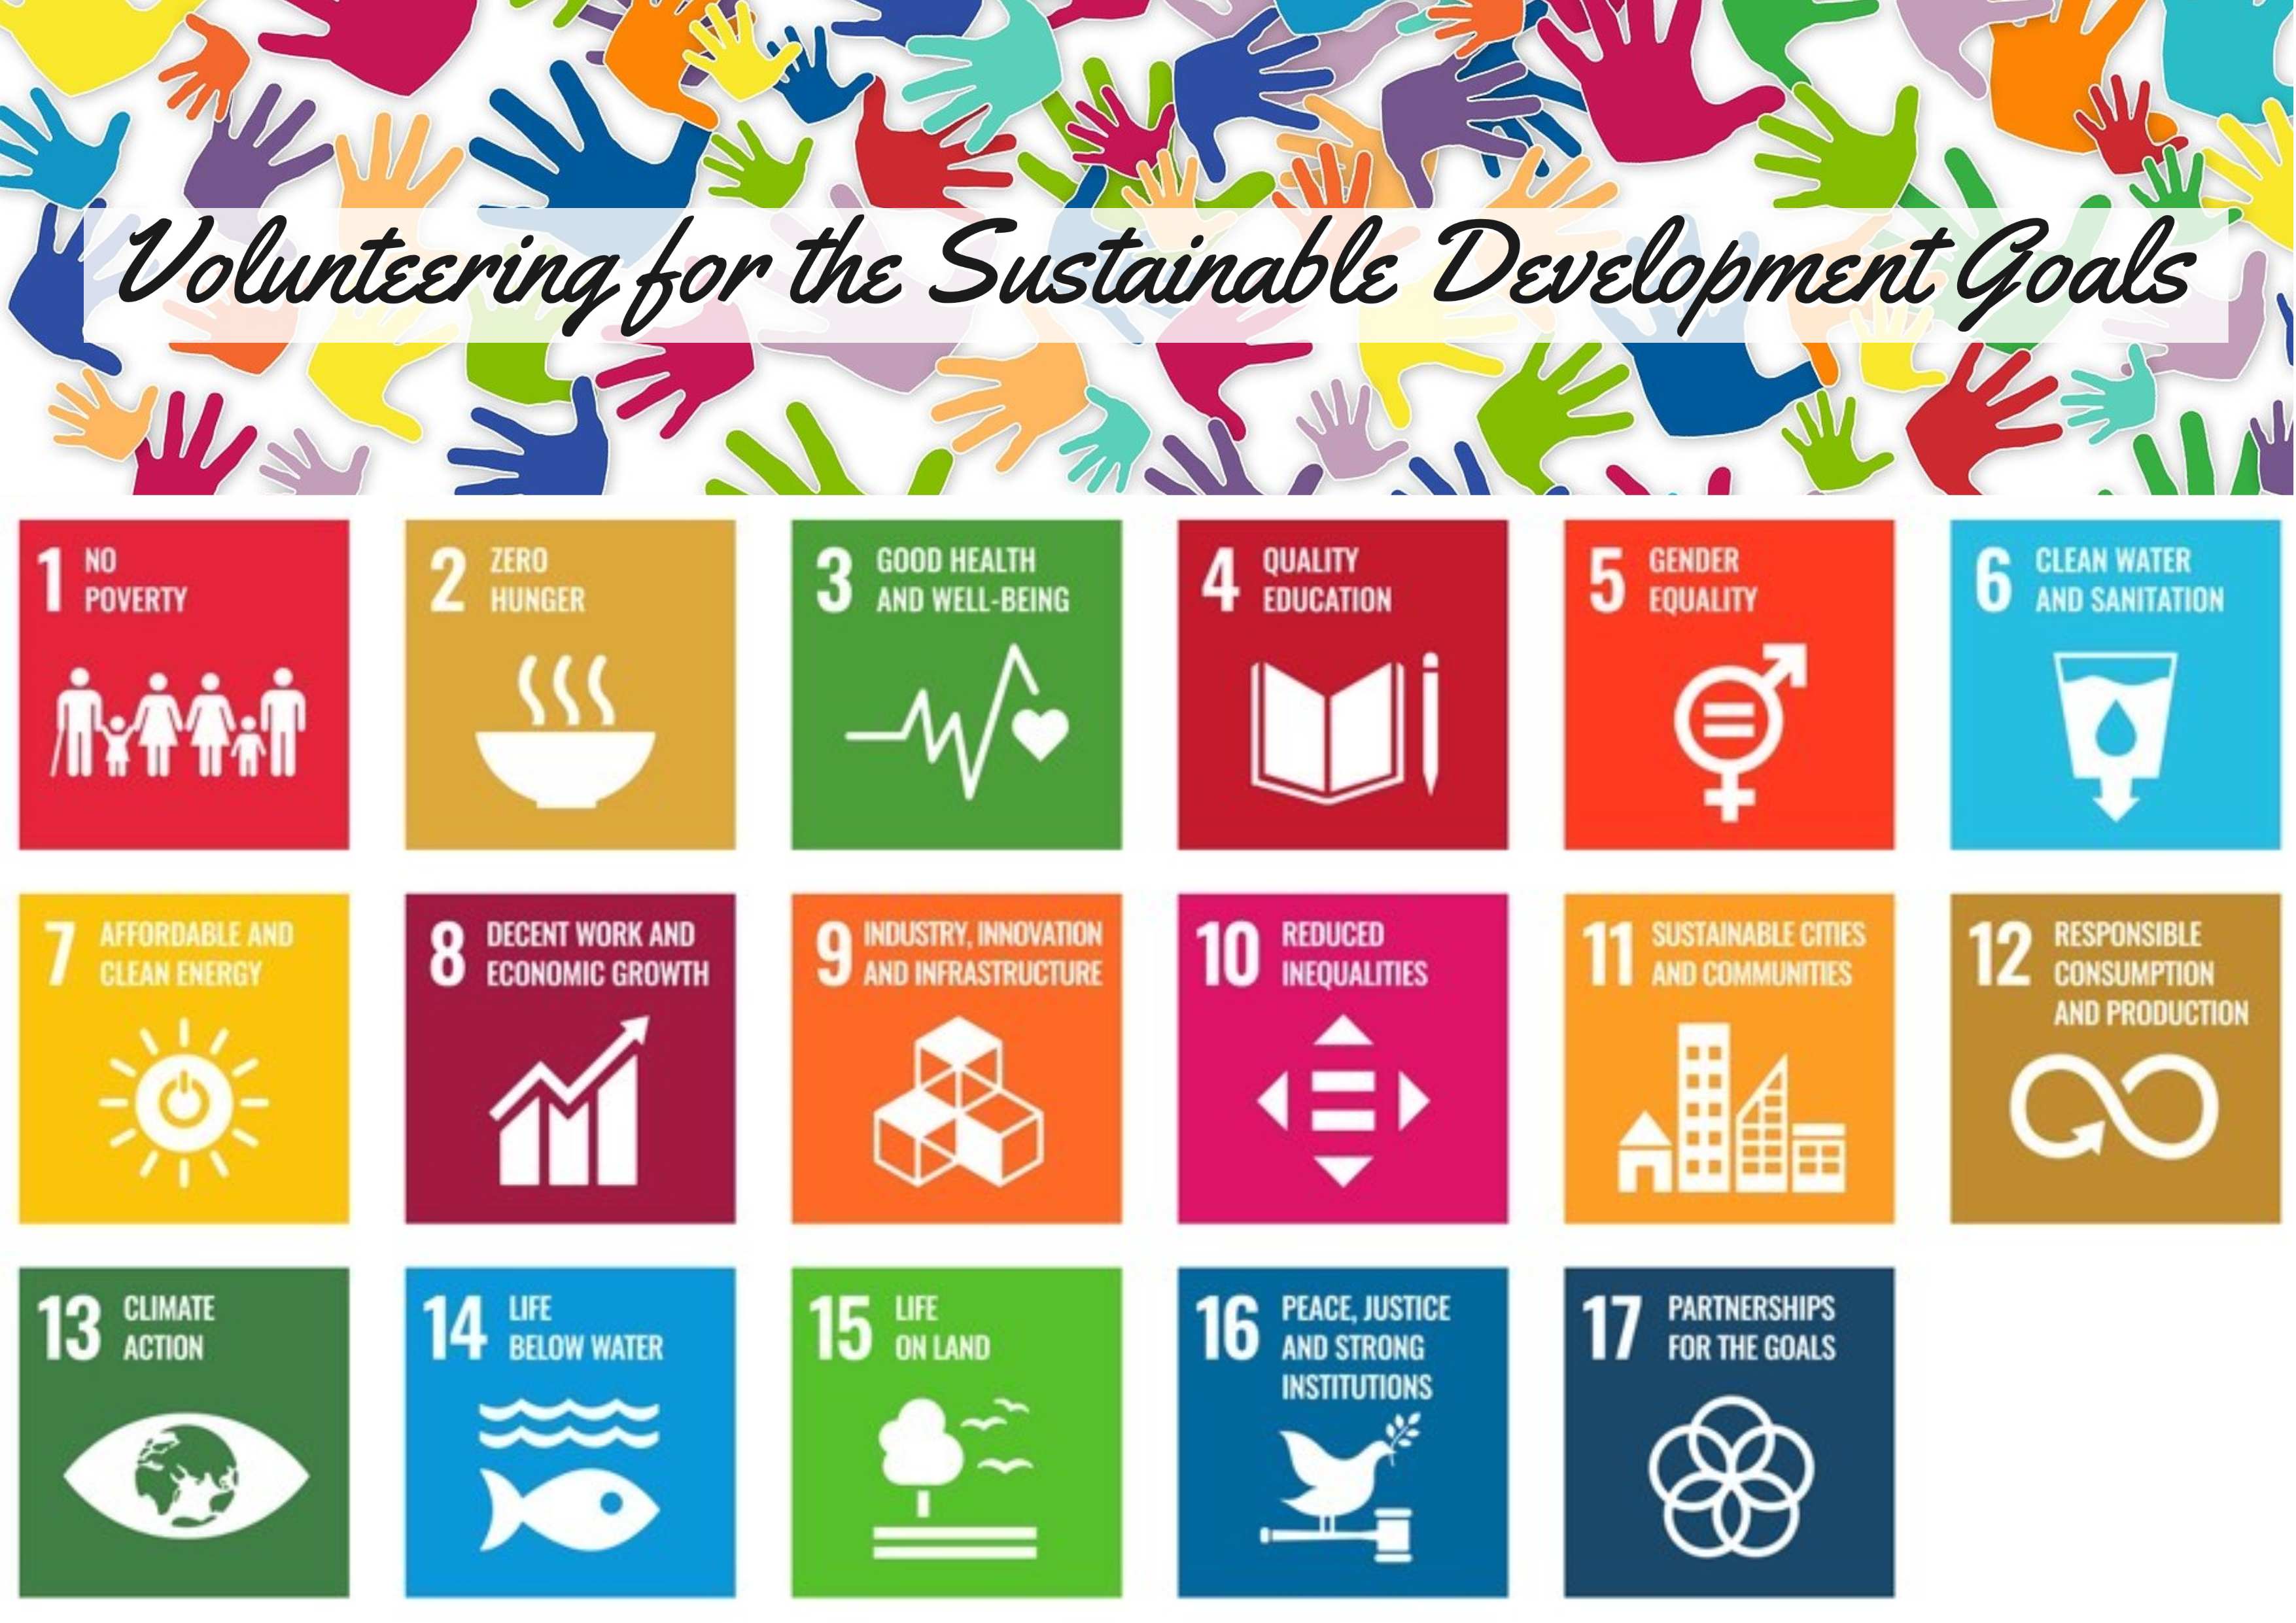 Volunteering for the Sustainable Development Goals course